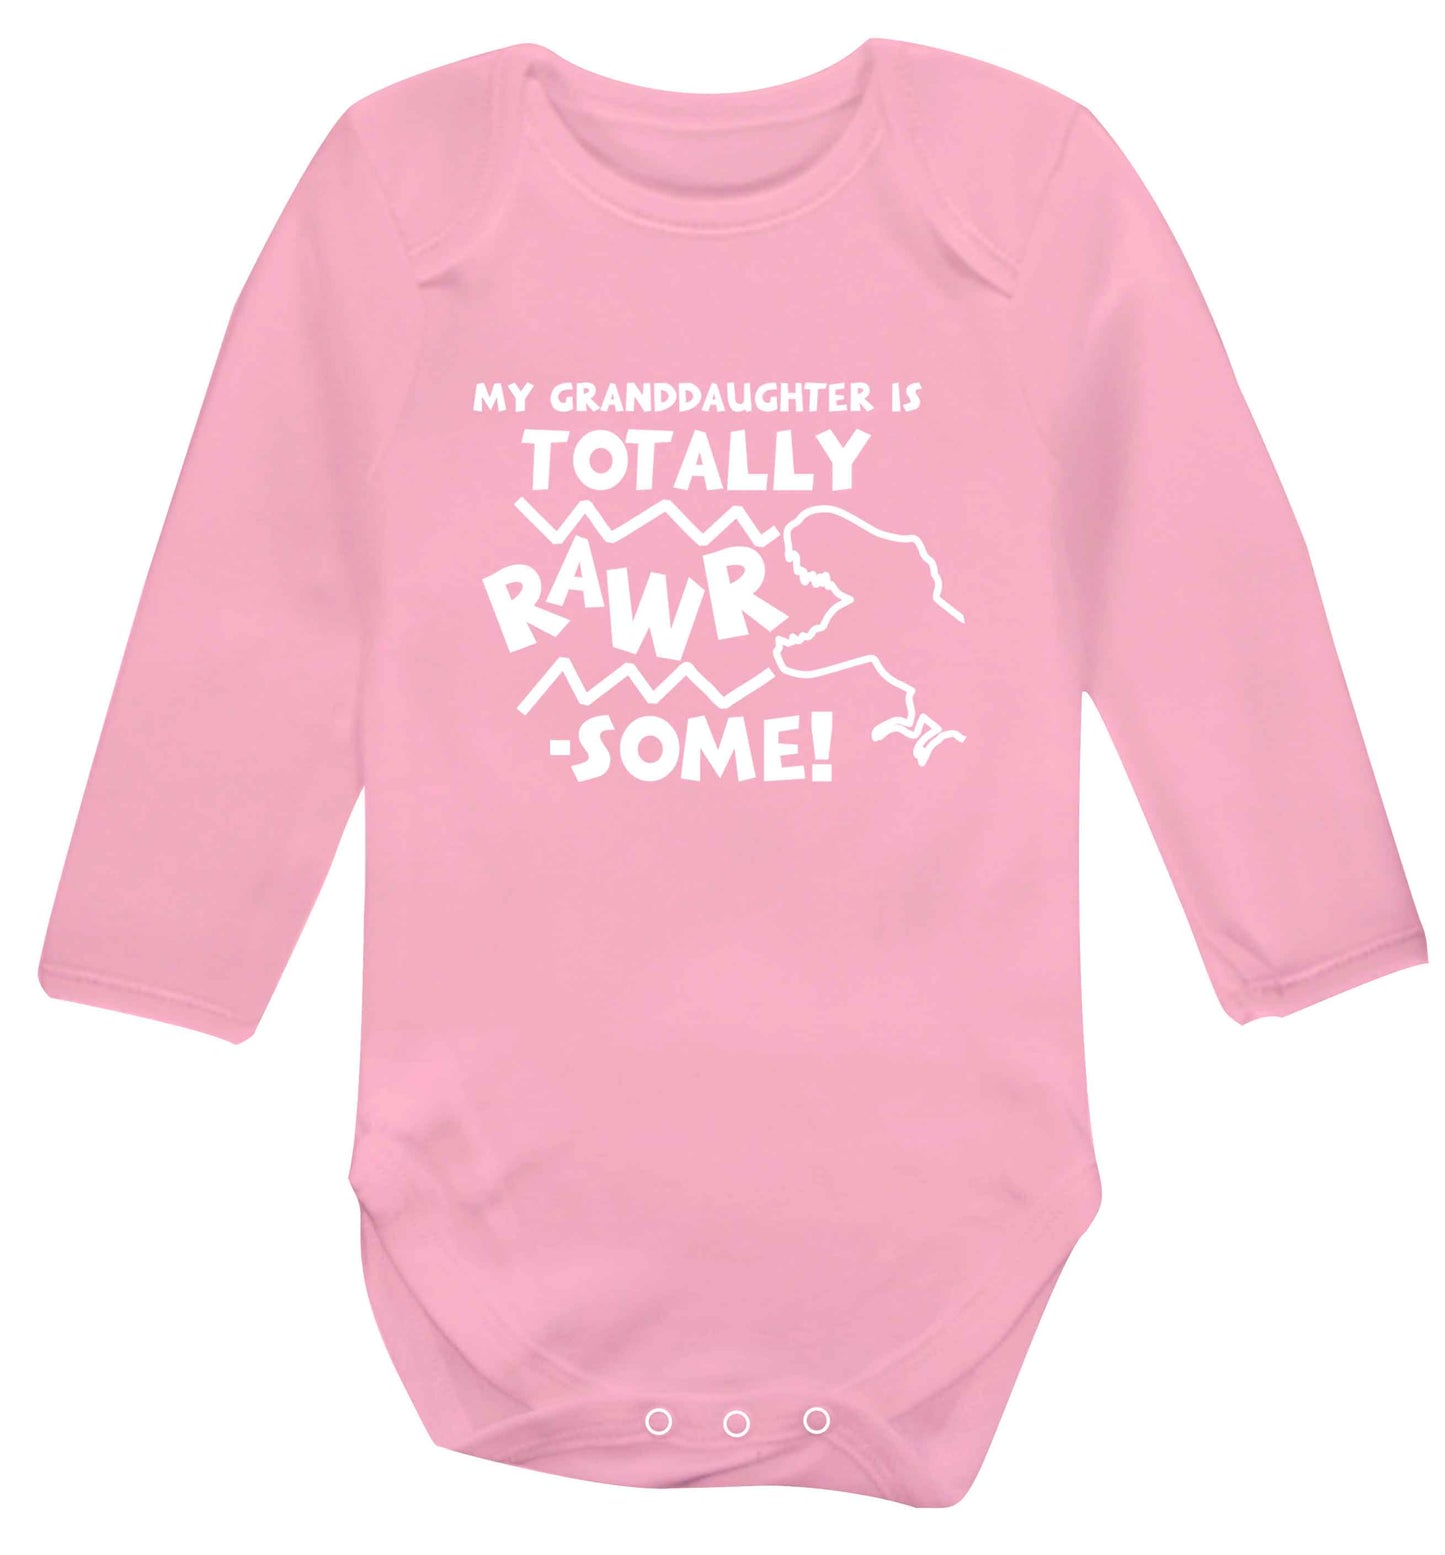 My granddaughter is totally rawrsome baby vest long sleeved pale pink 6-12 months